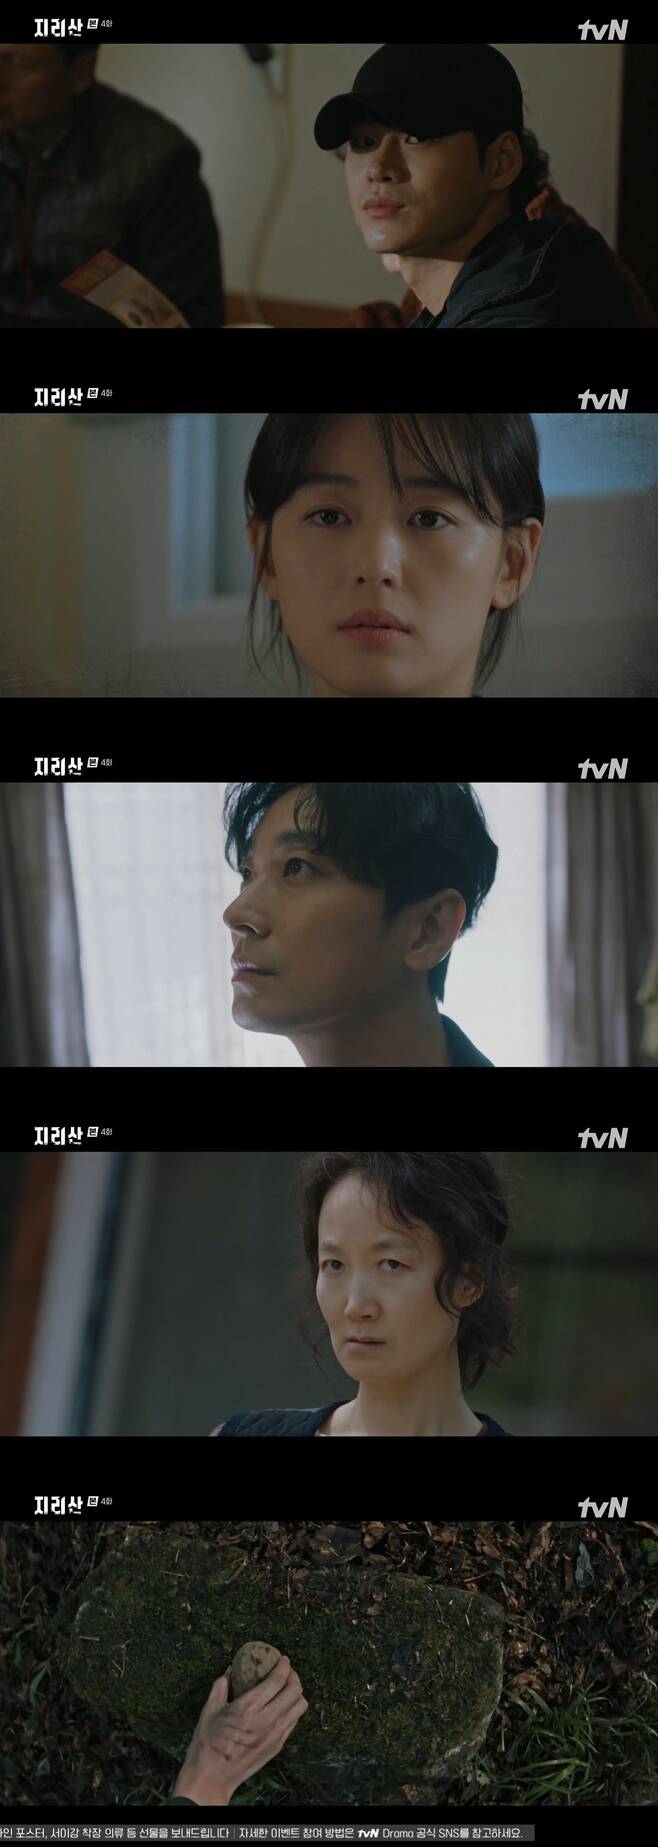 Seoul = = Jirisan Jun Ji-hyun and Ju Ji-hoon discovered the likely The Suspect, Yoon Ji-on, while digging into the potato bomb case.In the 4th episode of TVNs Saturday Drama Jirisan (played by Kim Eun-hee/director Lee Eung-bok) broadcasted on the afternoon of the 31st, the Suspect (Yoon Ji-on) of potato bombs appeared, while the Seo-gang (Jun Ji-hyun) and the gang hyun (Ju Ji-hoon) were shown following the truth of the incident.On this day, Lee Da-won (Go Min-si) noticed that the mark left in the mountain had changed at the request of the Seoi River.At this time, the soul of the gang hyun, who became a birth age, appeared to Lee, and Idawon left quickly.At that moment, the state of the gang hyun in the Plants human state changed dramatically, and the birth age of the gang hyun was still connected to the body.Seoi River checked the case logs written by gang hyun in his notebook in 2019, and found out that Cho Dae-jin (Sung Dong-il) was off duty when the disaster occurred every time.As the Seoi River was comparing the case log, someone tried to open the door urgently. The main character was Idawon.Lee Da-won, who hastily visited the Seoi River, was surprised to announce that the location of the mark had changed, but the unmanned sensor camera installed in front of it was surprised to see that the branches were moving by themselves.The Seoi River, which was watching the video, expected the victim to occur in the Dowon Valley, which is pointed to by the mark, and reported the occurrence of the victim to the nearby Rangers.I was worried that my senior, this is a false report, but as expected by the Seoi River, a victim was found in the Dowon Valley.The victim, who had been brought to the hospital, turned out to have fallen after eating the yogurt that someone had left behind, which was clearly linked to the case of the victims who had fallen after eating the yogurt that occurred in a series.When I met the victim, Seo River heard about the ghost that he was going to Jirisan, and asked the victim to take a picture of the clothes he had worn in the past with the gang hyun.At this time, the victim who saw the gang hyun was surprised to say, This is the person, this is the ghost.So, the river called the hospital where the gang hyun was hospitalized and confirmed his condition.Again in 2018, the Seoi River and gang hyun met with Yoon Soo-jin (Kim Kook-hee) at the National Park Services Endangered Species Restoration Center and were reported to have disappeared the snake that was released.So, gang hyun, who was investigating the health center with Yun Su-jin Seo-gang, asked Yun Su-jin about the poisonous mushrooms related to the yogurt case.The three men who followed the health center president later noticed the signal ringing from the chip on the snake, and more urgently chased the health center president.In the end, the Seoi River was able to detect the scene where illegal wild animals were caught and treated.gang hyun climbed the West River and Jirisan again based on his own vision, when the health center president was pictured climbing the mountain again and setting up a trap to catch the snake.The health director found a potato-shaped piece on the rock, and as soon as he put it in his hand, he exploded.The president of the health center died immediately, and the presidents wife fell asleep.Yoon Su-jin explained that the bomb was a potato bomb, and Gang hunjo informed the employees that there was no potato bomb at the time of patrol.At this time, the bereaved families of the president of the health center came to protest and pointed to the gang hyun and the Seoi River and said, My husband killed you.When the case eventually made headlines to the media, the director, Kim Gye-hee (played by Joo Jin-mo), said he would step down from his position with responsibility. After that, Kim Gye-hee went to the bereaved family and knelt down and apologized.gang hyun continued his investigation into potato bombs alone, and the hand that had placed the potato bombs he had seen in the light was evidence of the gang hyun.gang hyun conducted a survey focusing on workers who worked at the time of collecting potato bombs in the past.At this time, gang hyun found out that the potato bomb had disappeared from the grandfathers house of Ju Min-gyeong.At that time, Seoi River, who had a meeting with local residents, found a man (Yoon Ji-on) with a hand wound that gang hyun had seen in the city, and gang hyun also looked shocked when he realized that the man was a family member of Lee Yang-sun.